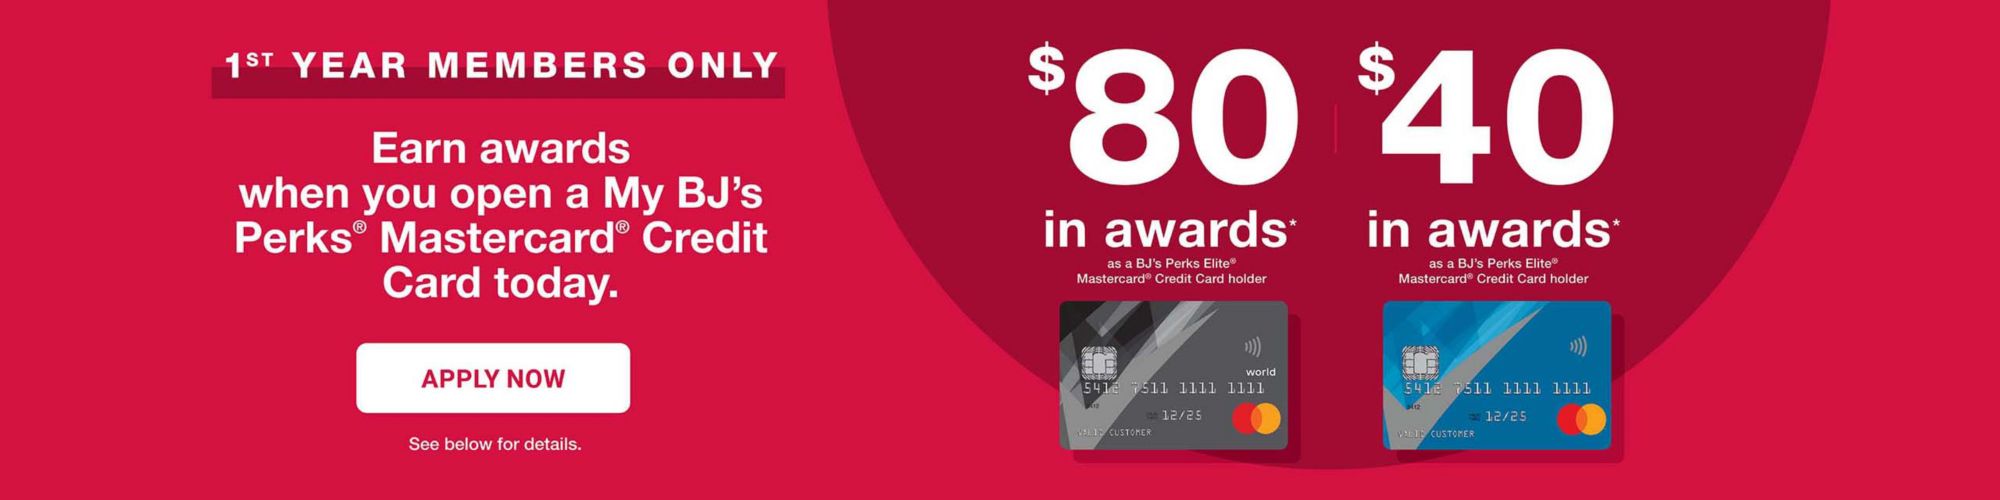 Earn awards when you ope na My BJ's Perks Mastercard credit card today. Click to apply now. See details below.